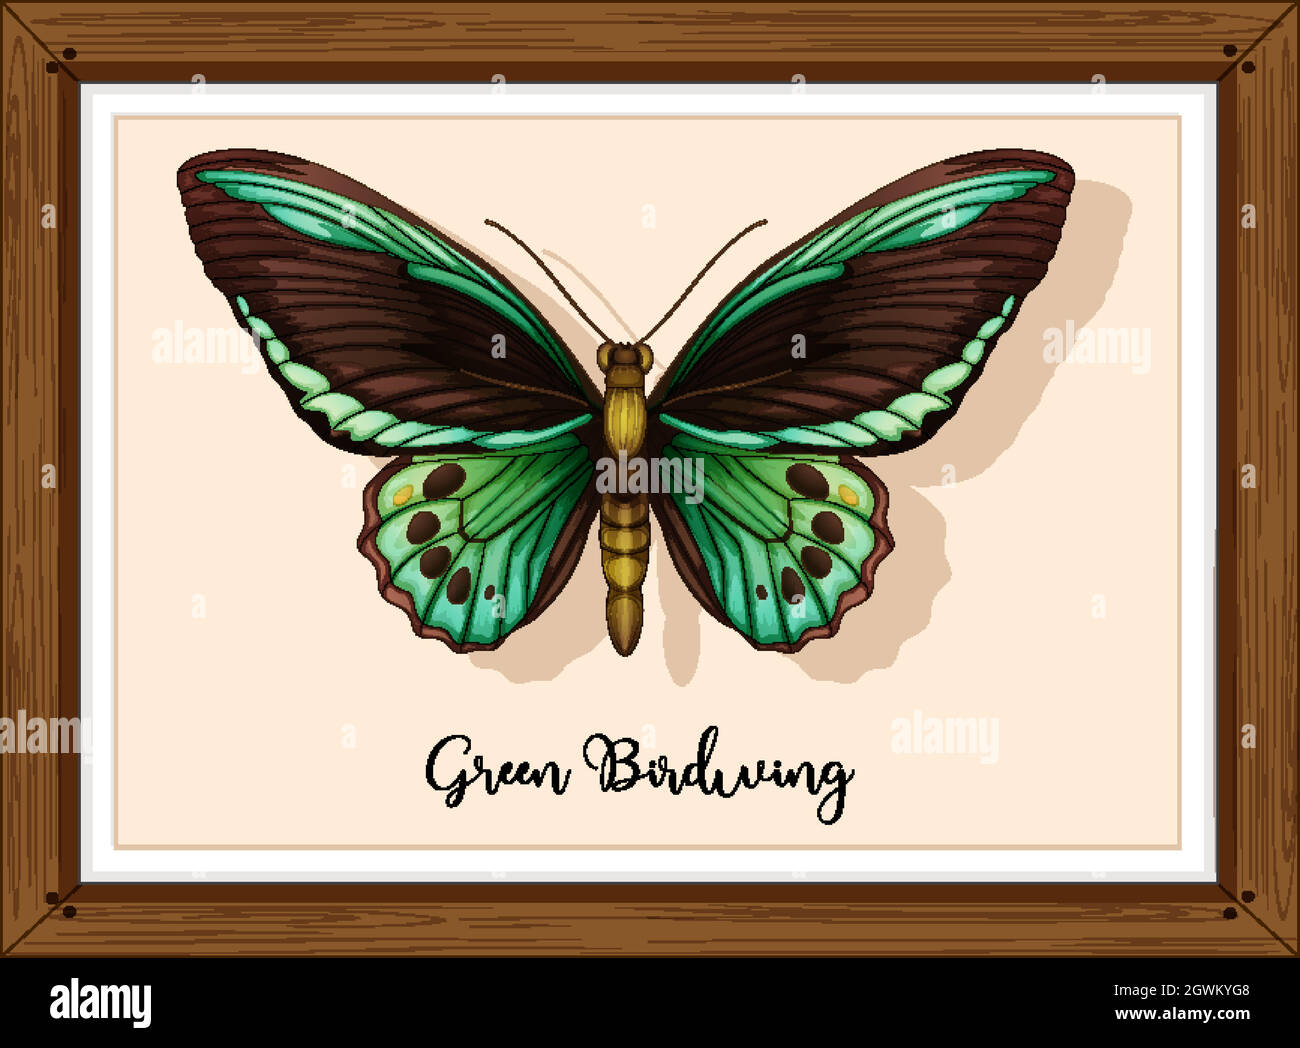 Butterfly on wooden frame Stock Vector